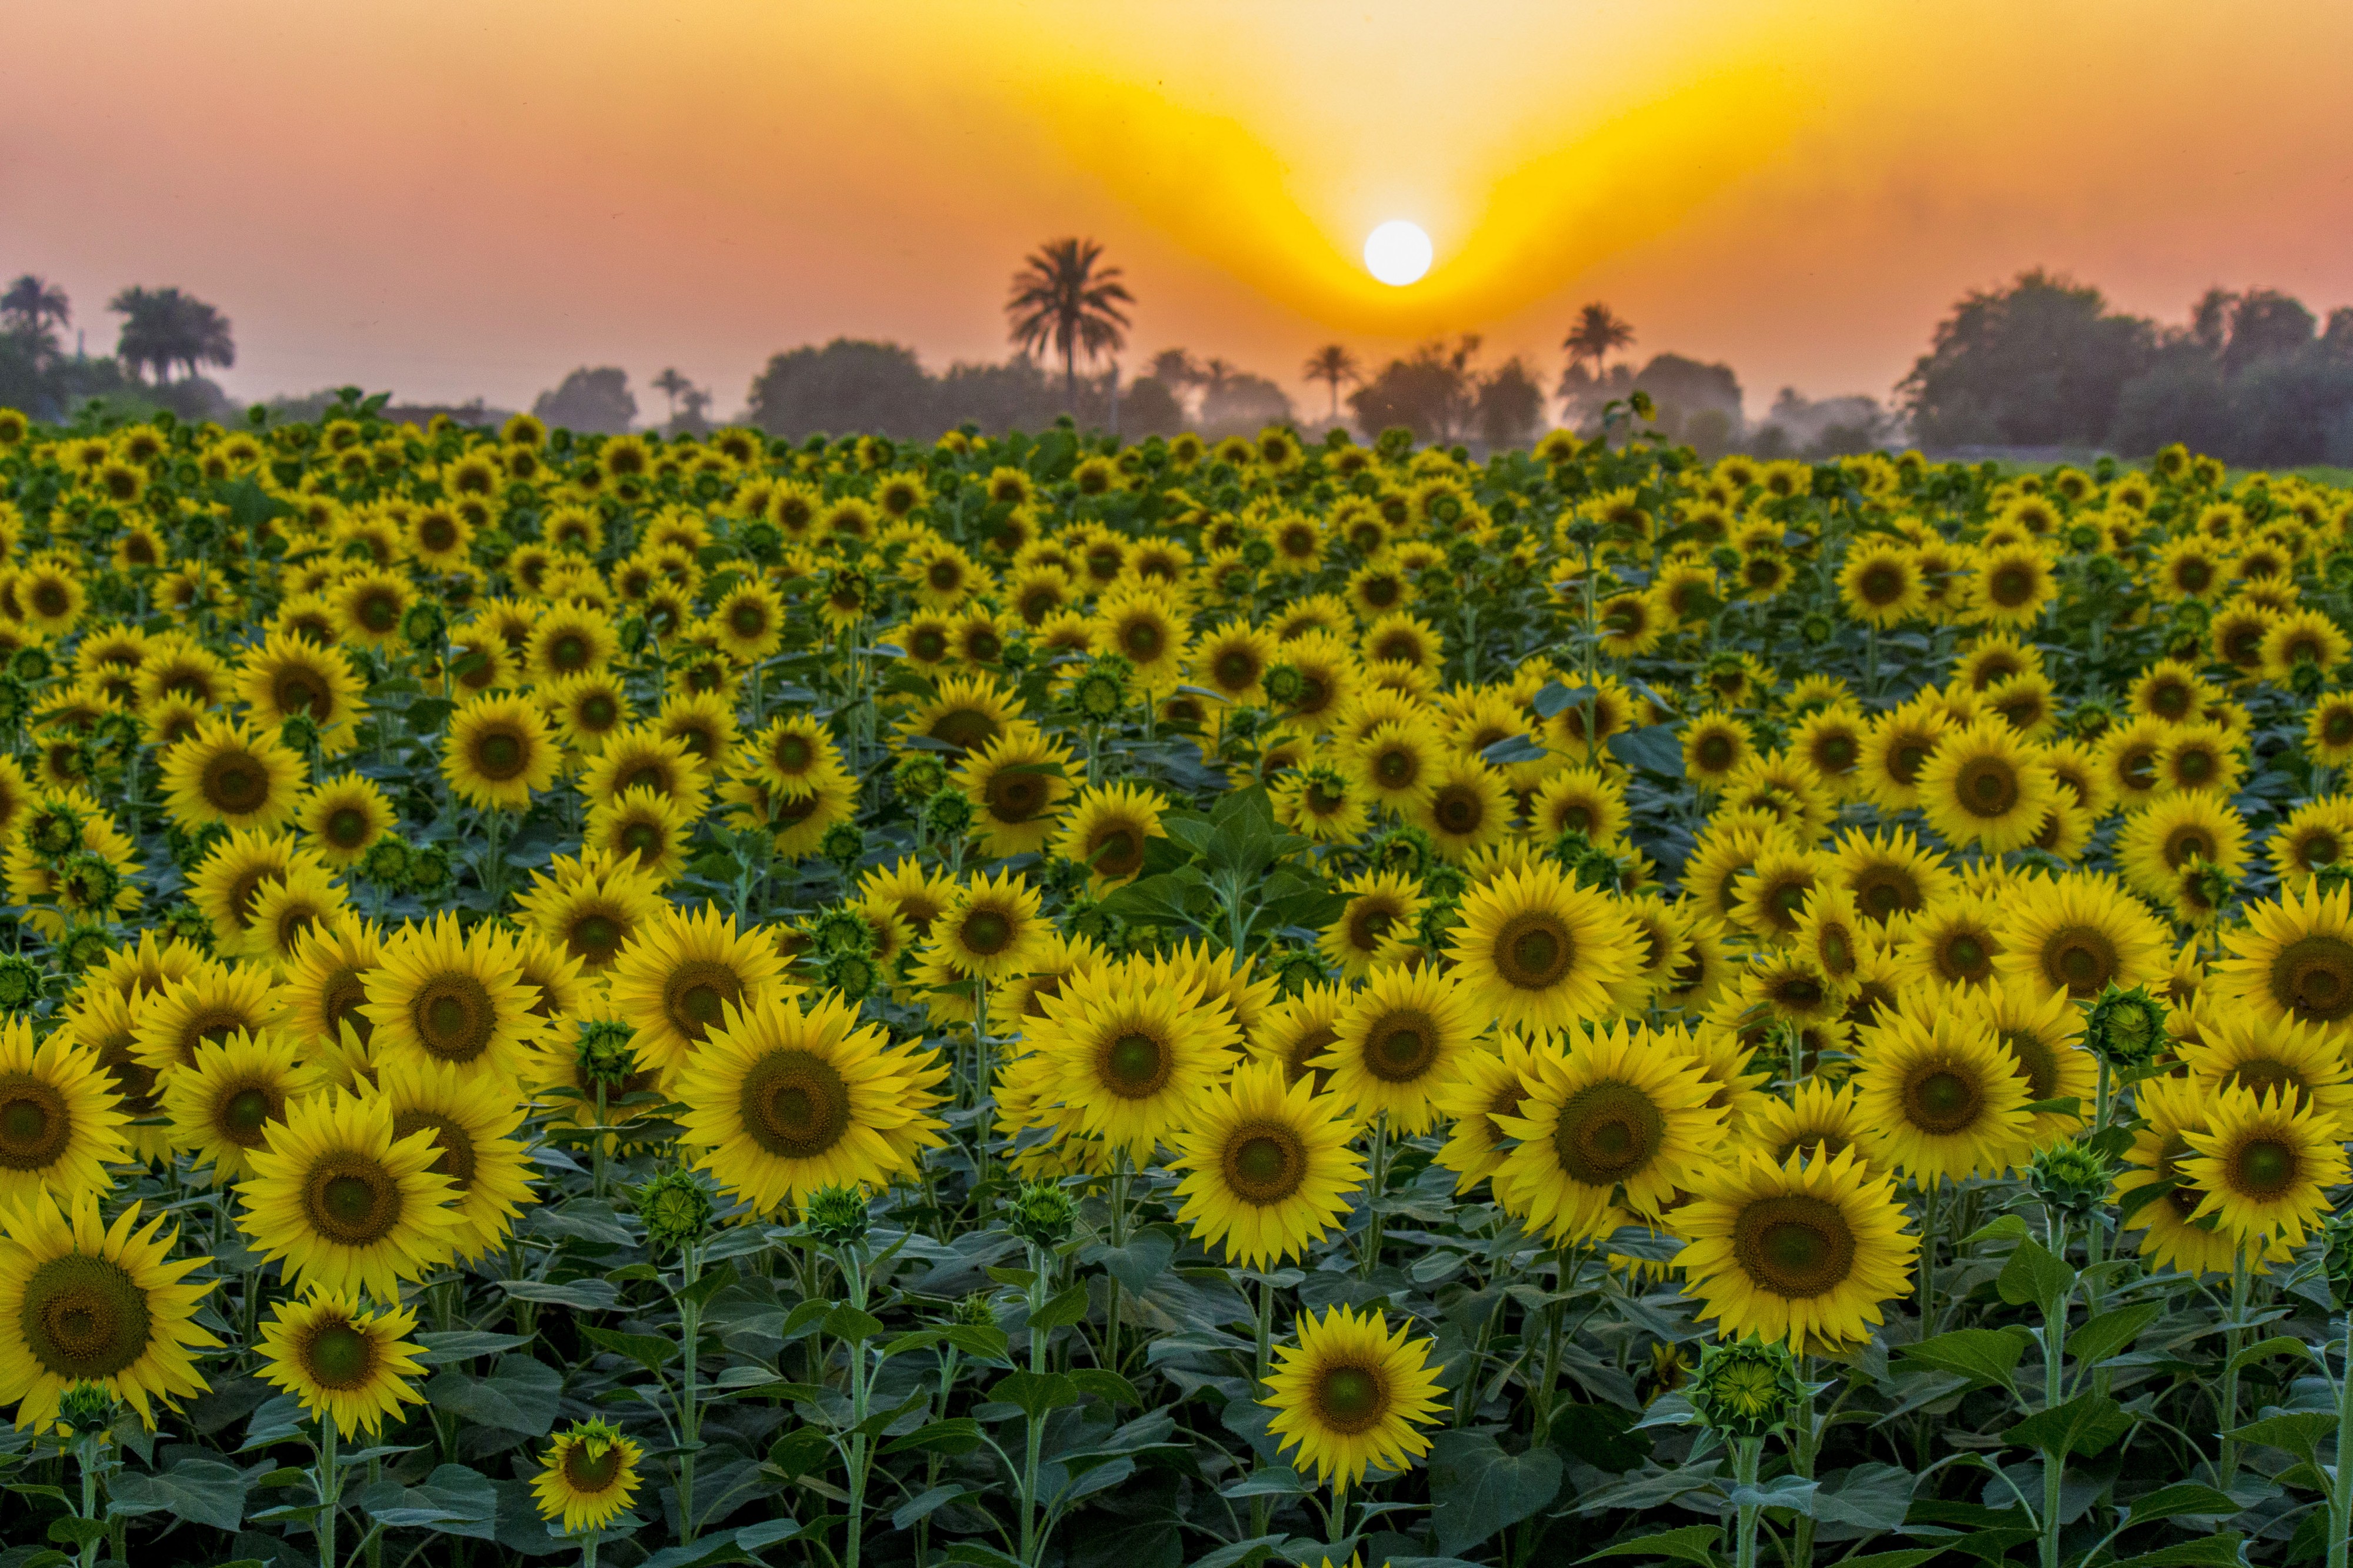 Sunflowers and the Sun